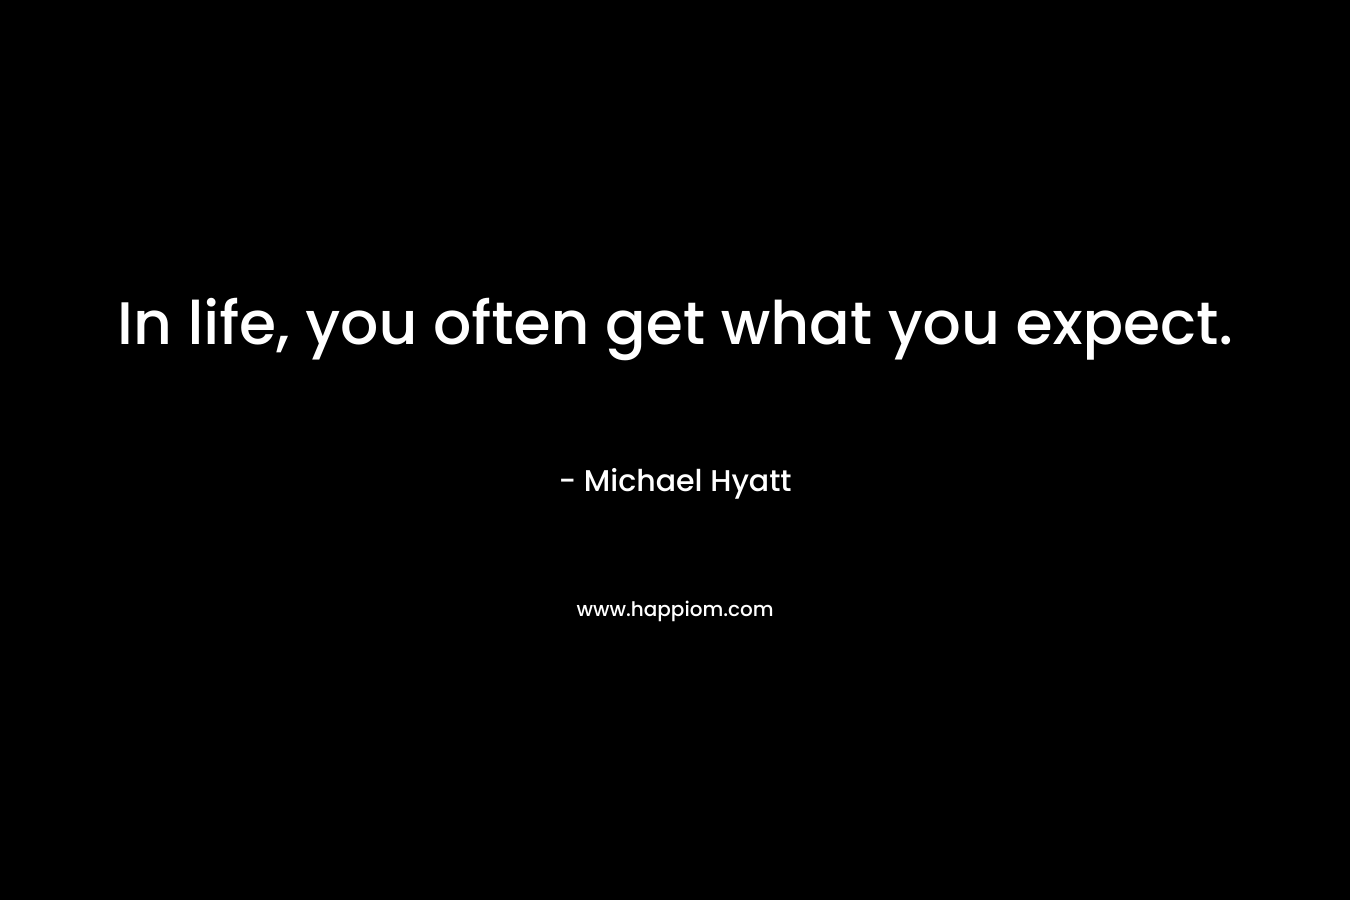 In life, you often get what you expect.